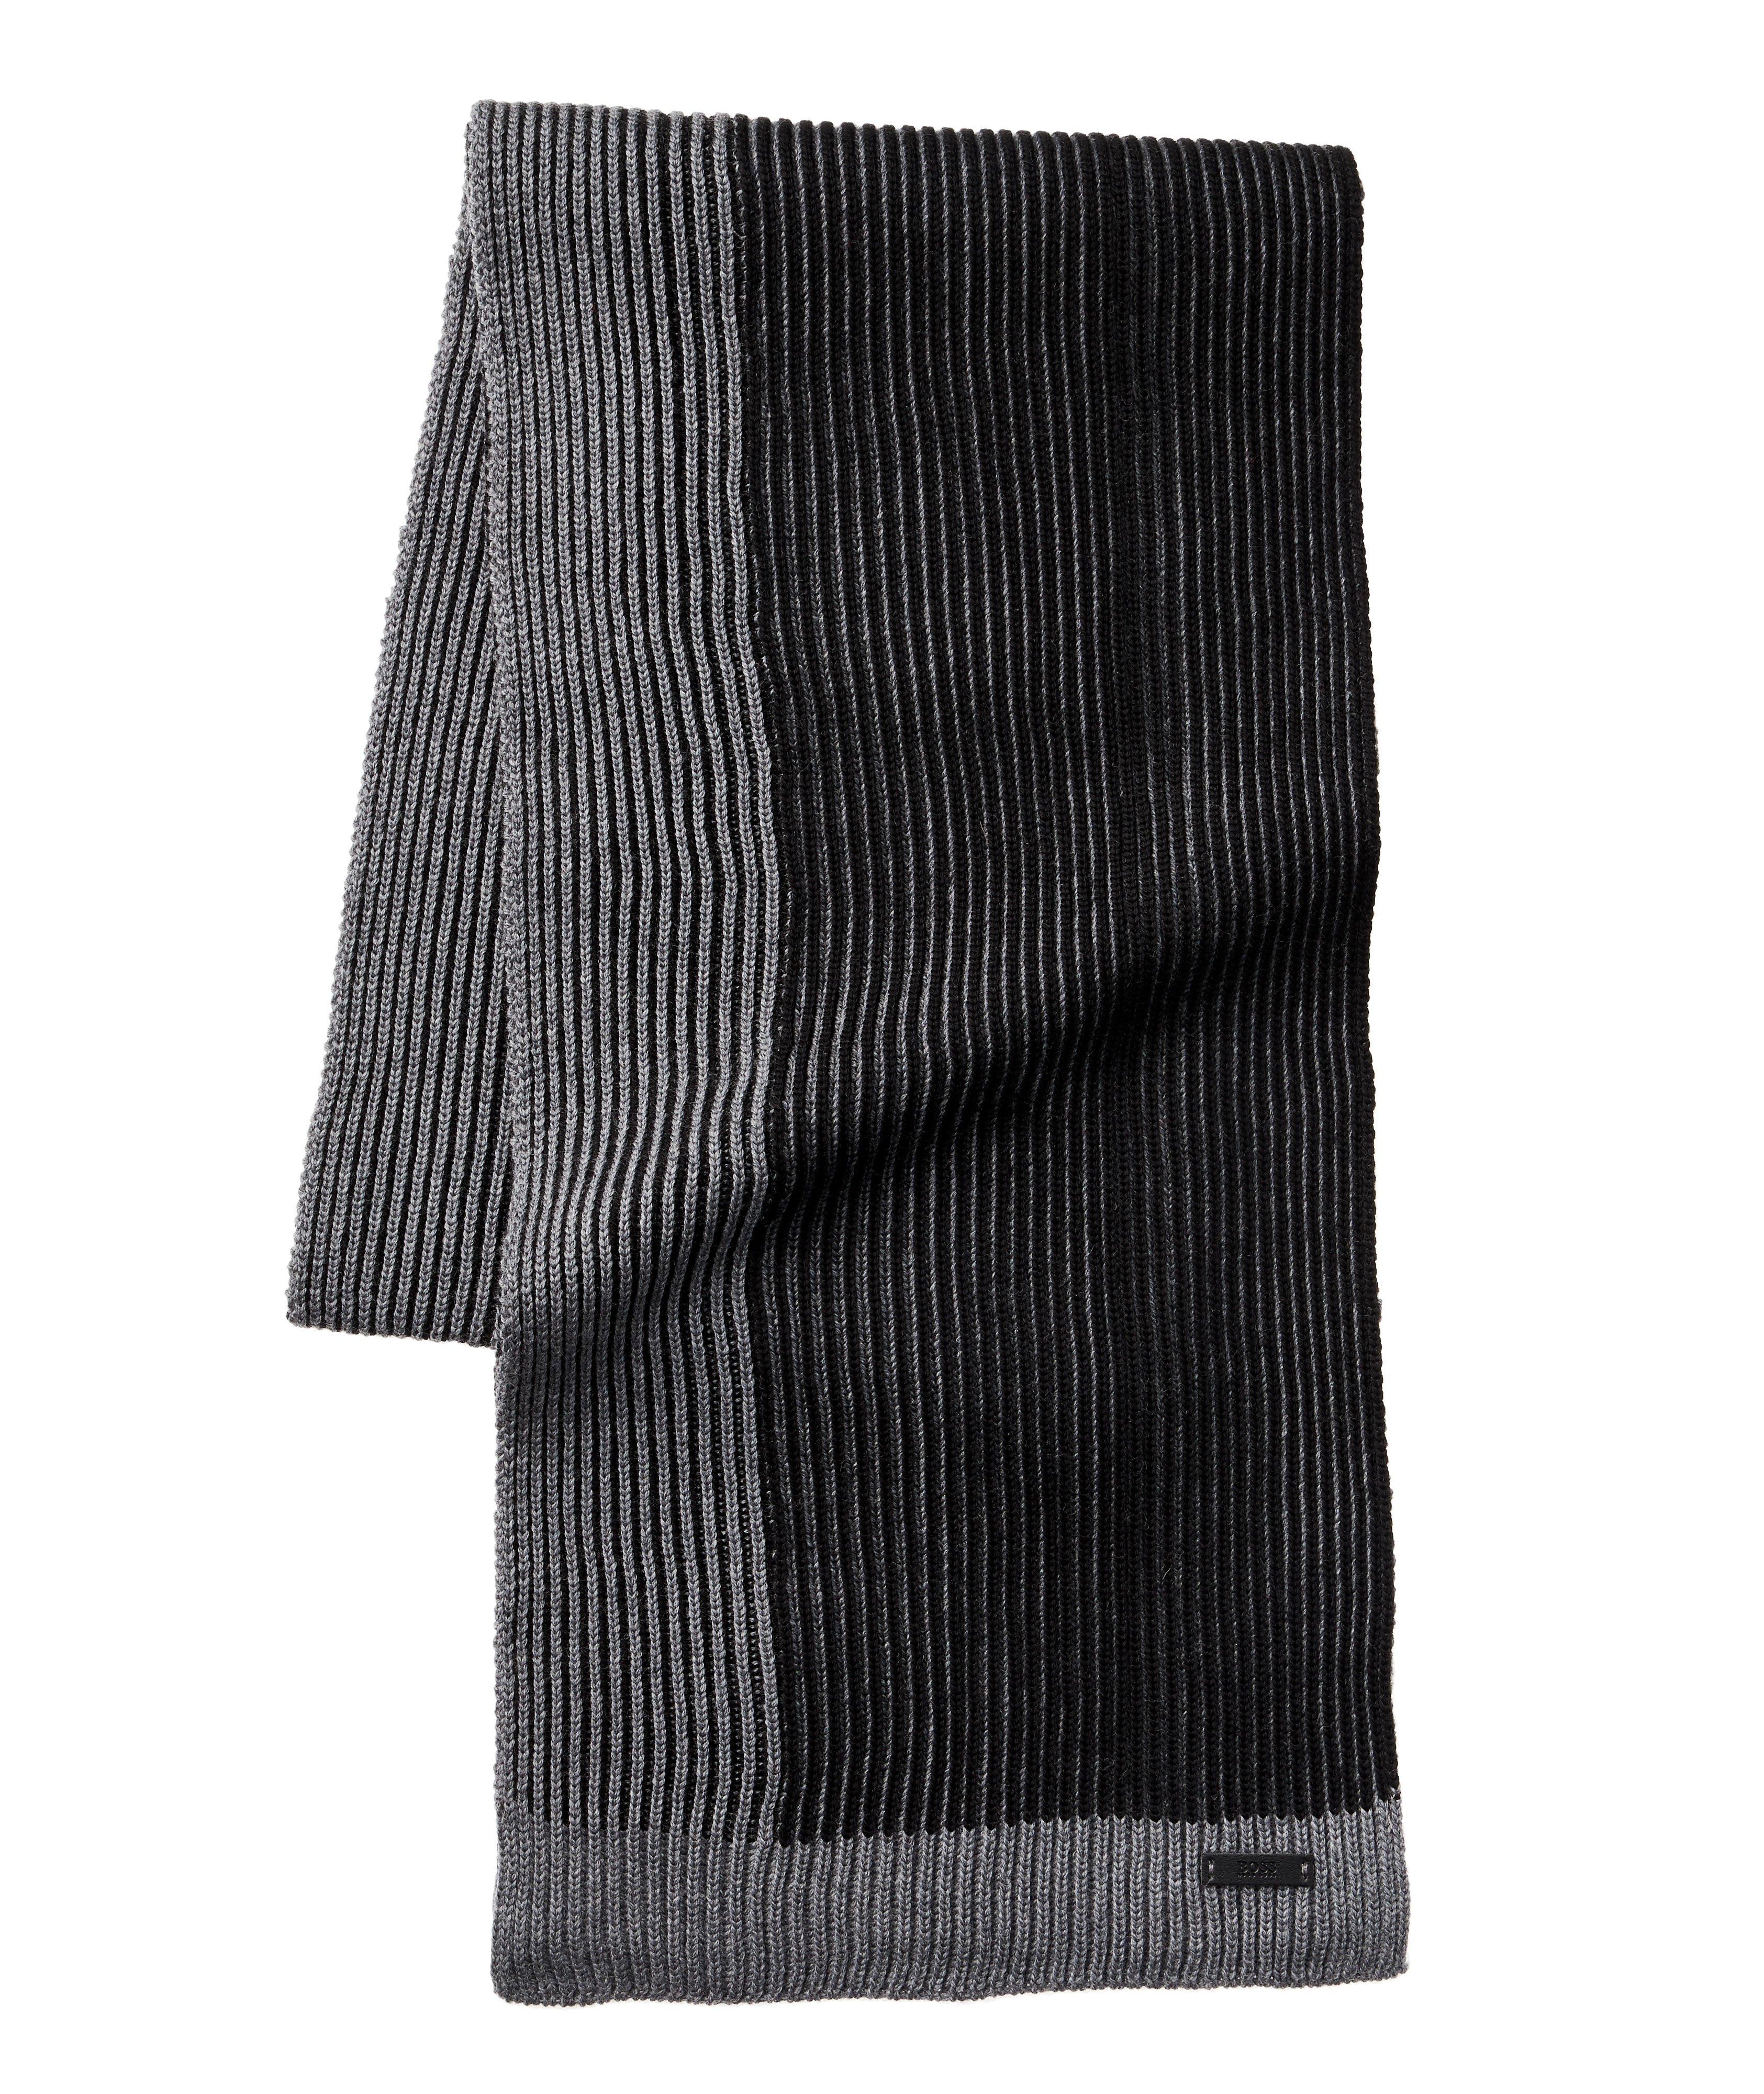 Marcon Ribbed Wool Scarf image 0